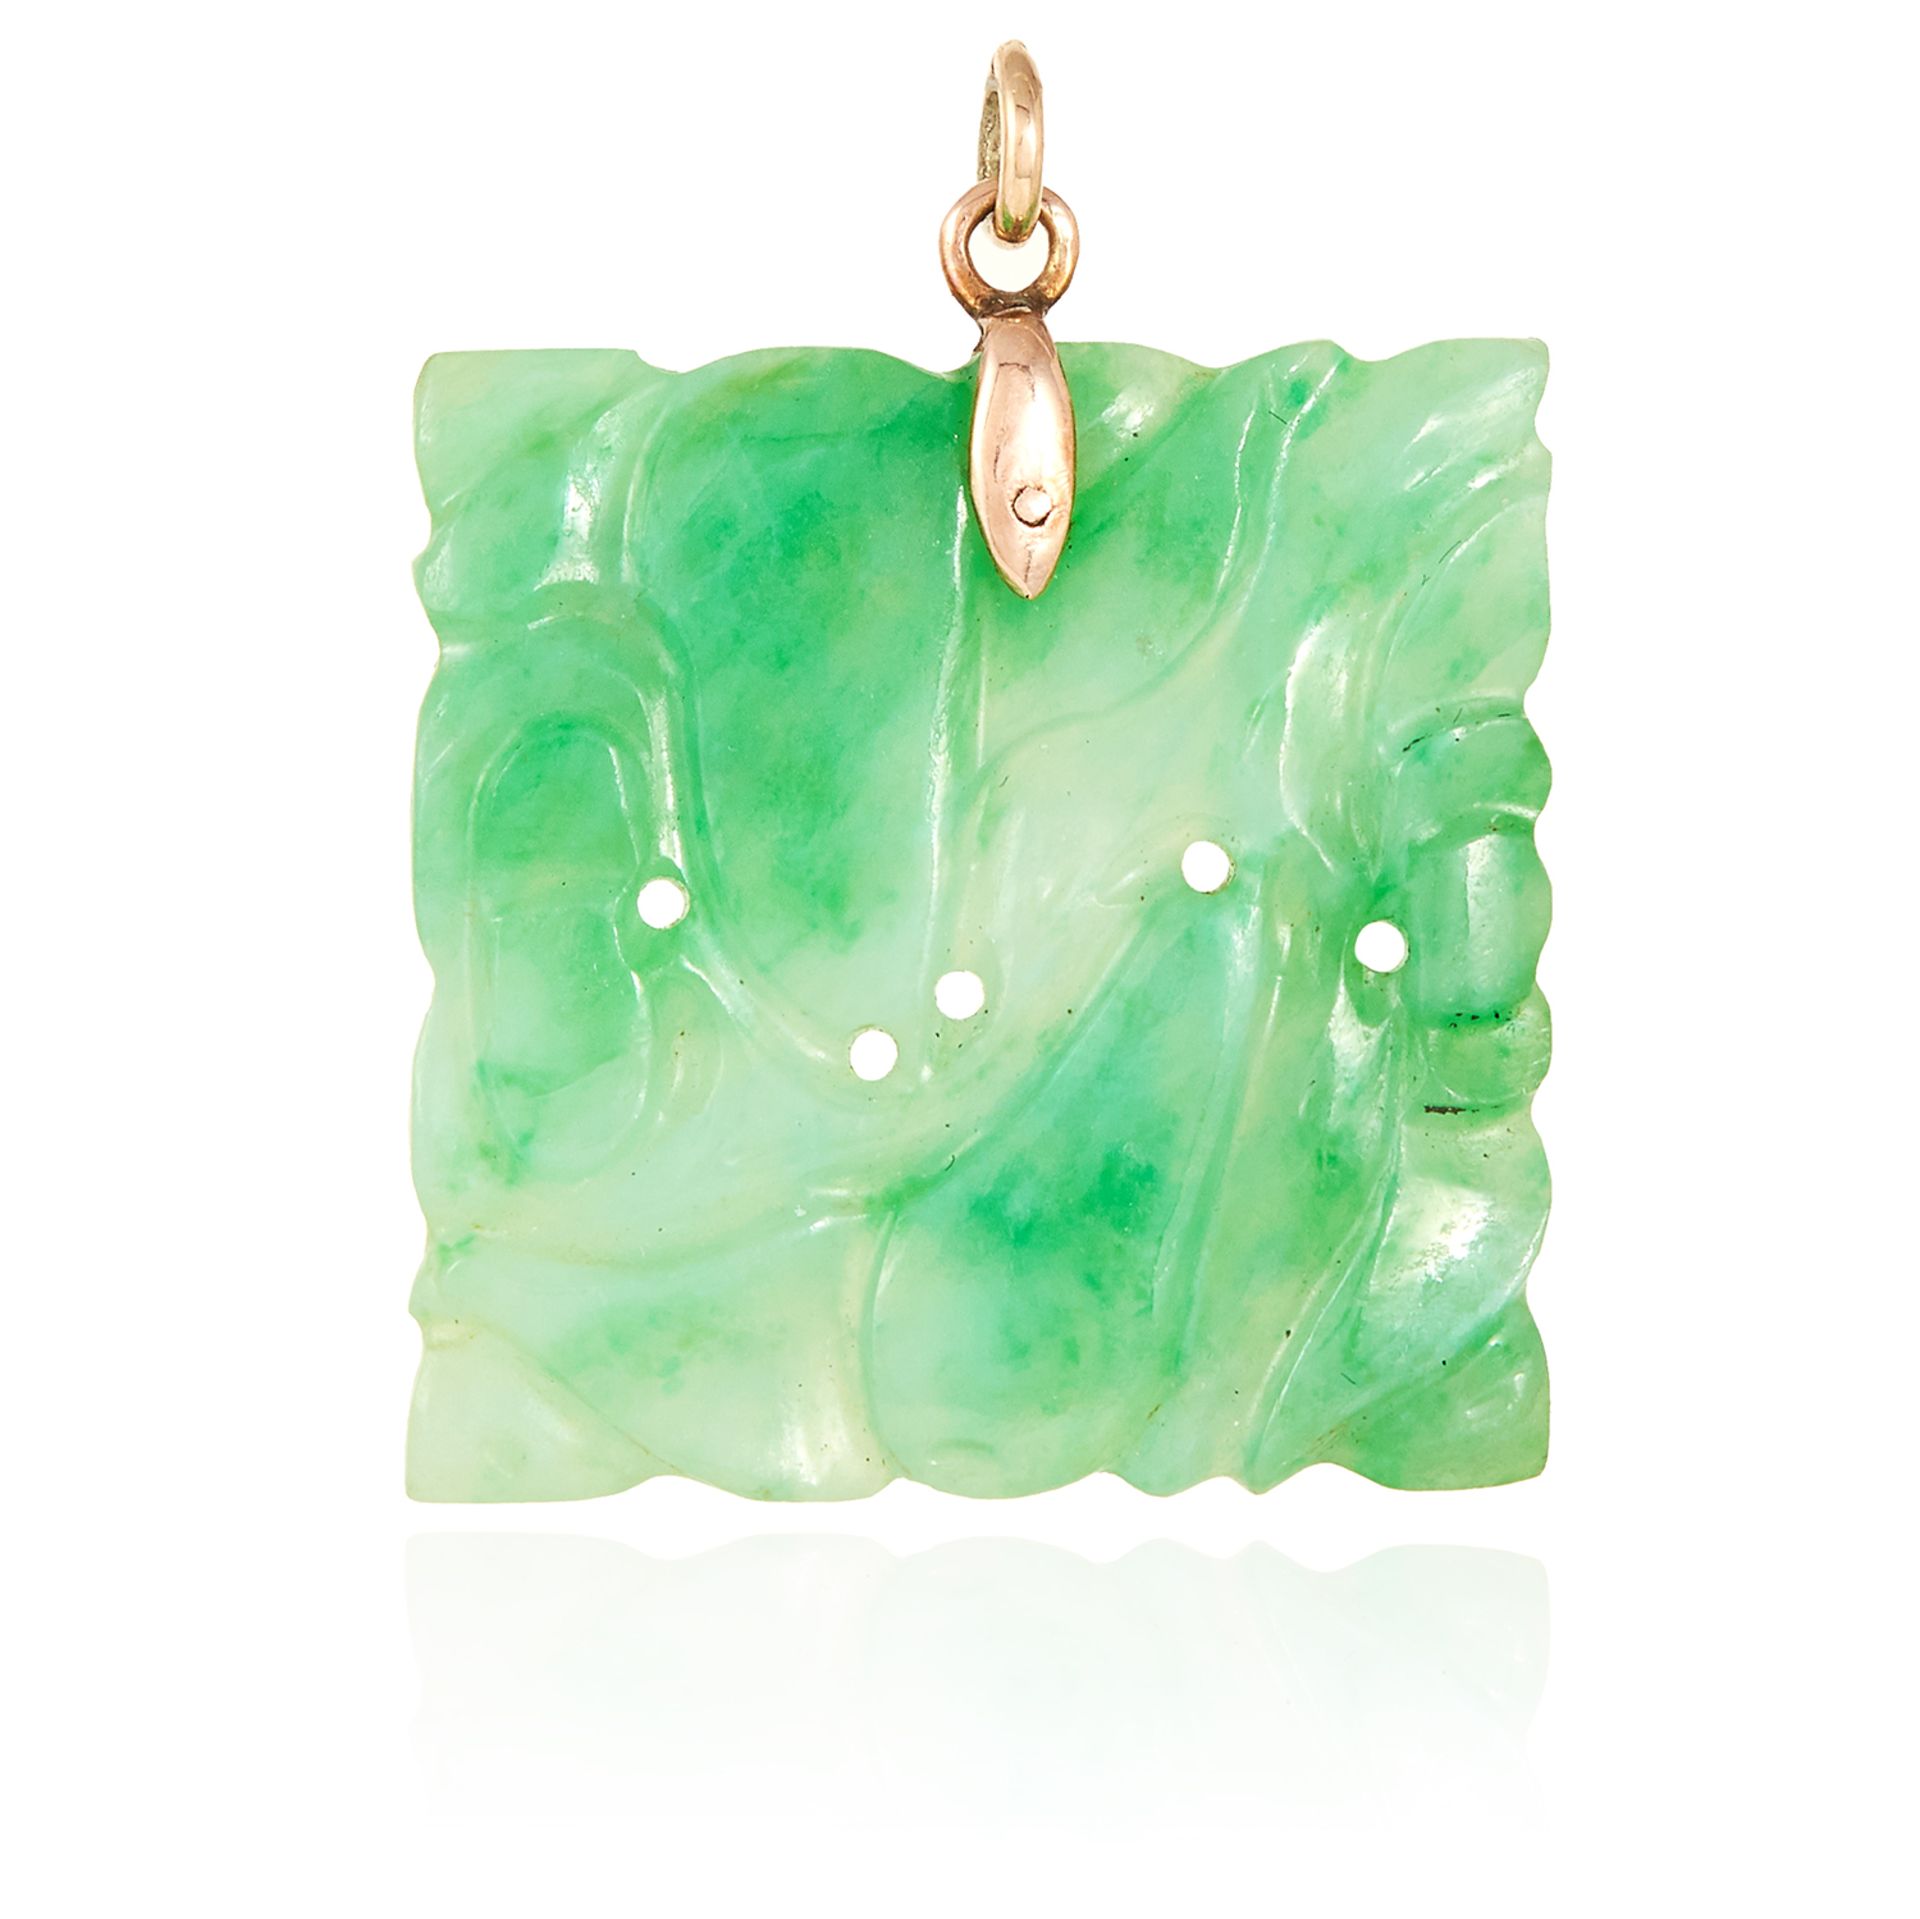 A CHINESE CARVED JADEITE JADE PENDANT in yellow gold, the square carved plaque suspended from a gold